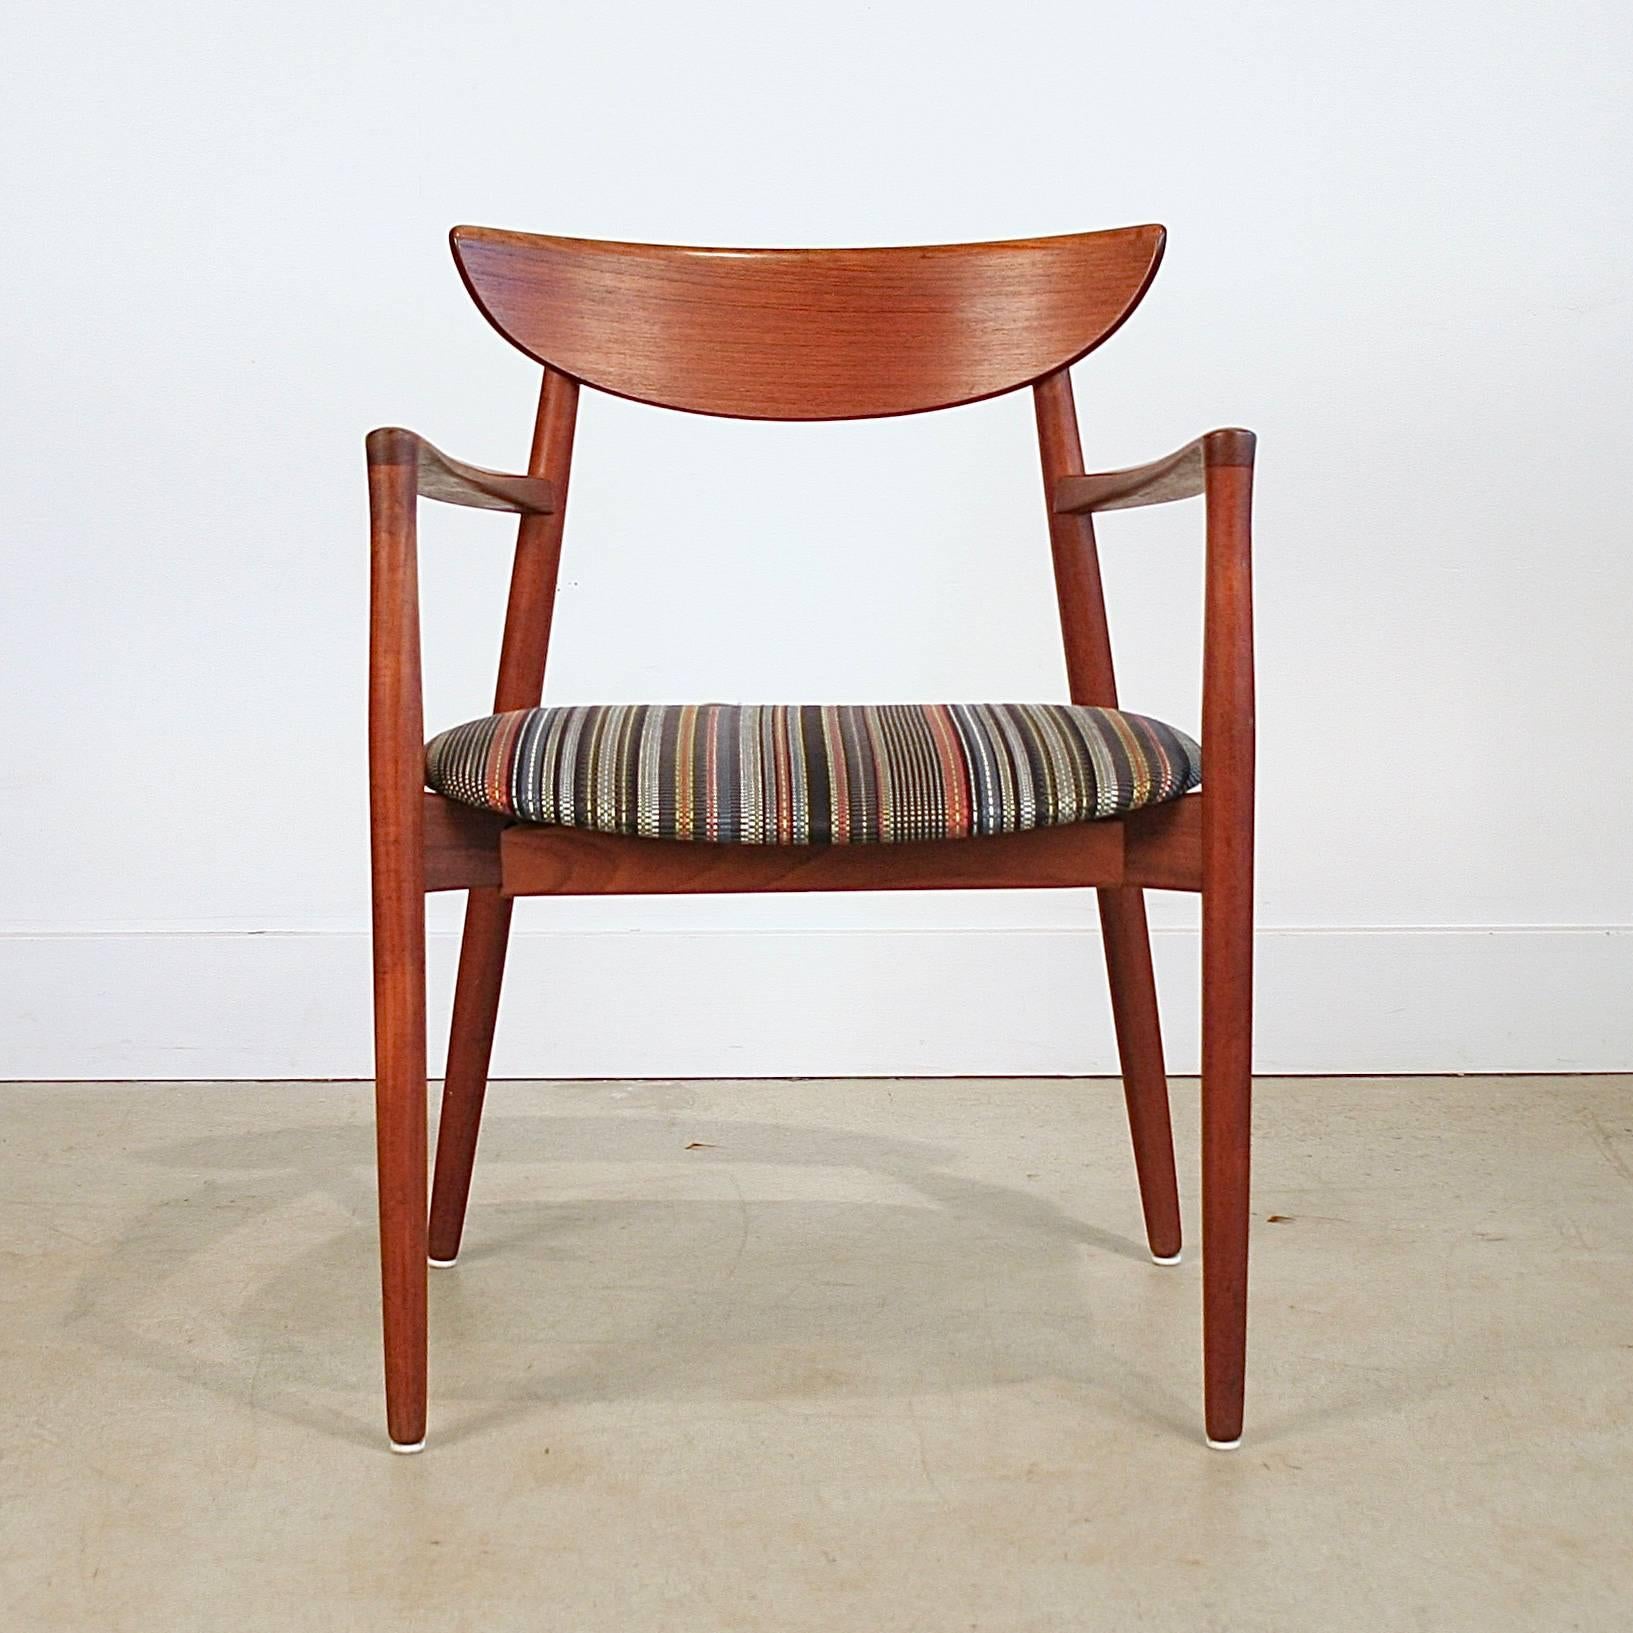 Beautiful vintage teak arm chair with half moon back rest and fin. The teak Carver chair designed by Harry Ostergaard for Randers manufacturing, Denmark. Newly reupholstered. Made in Denmark. 